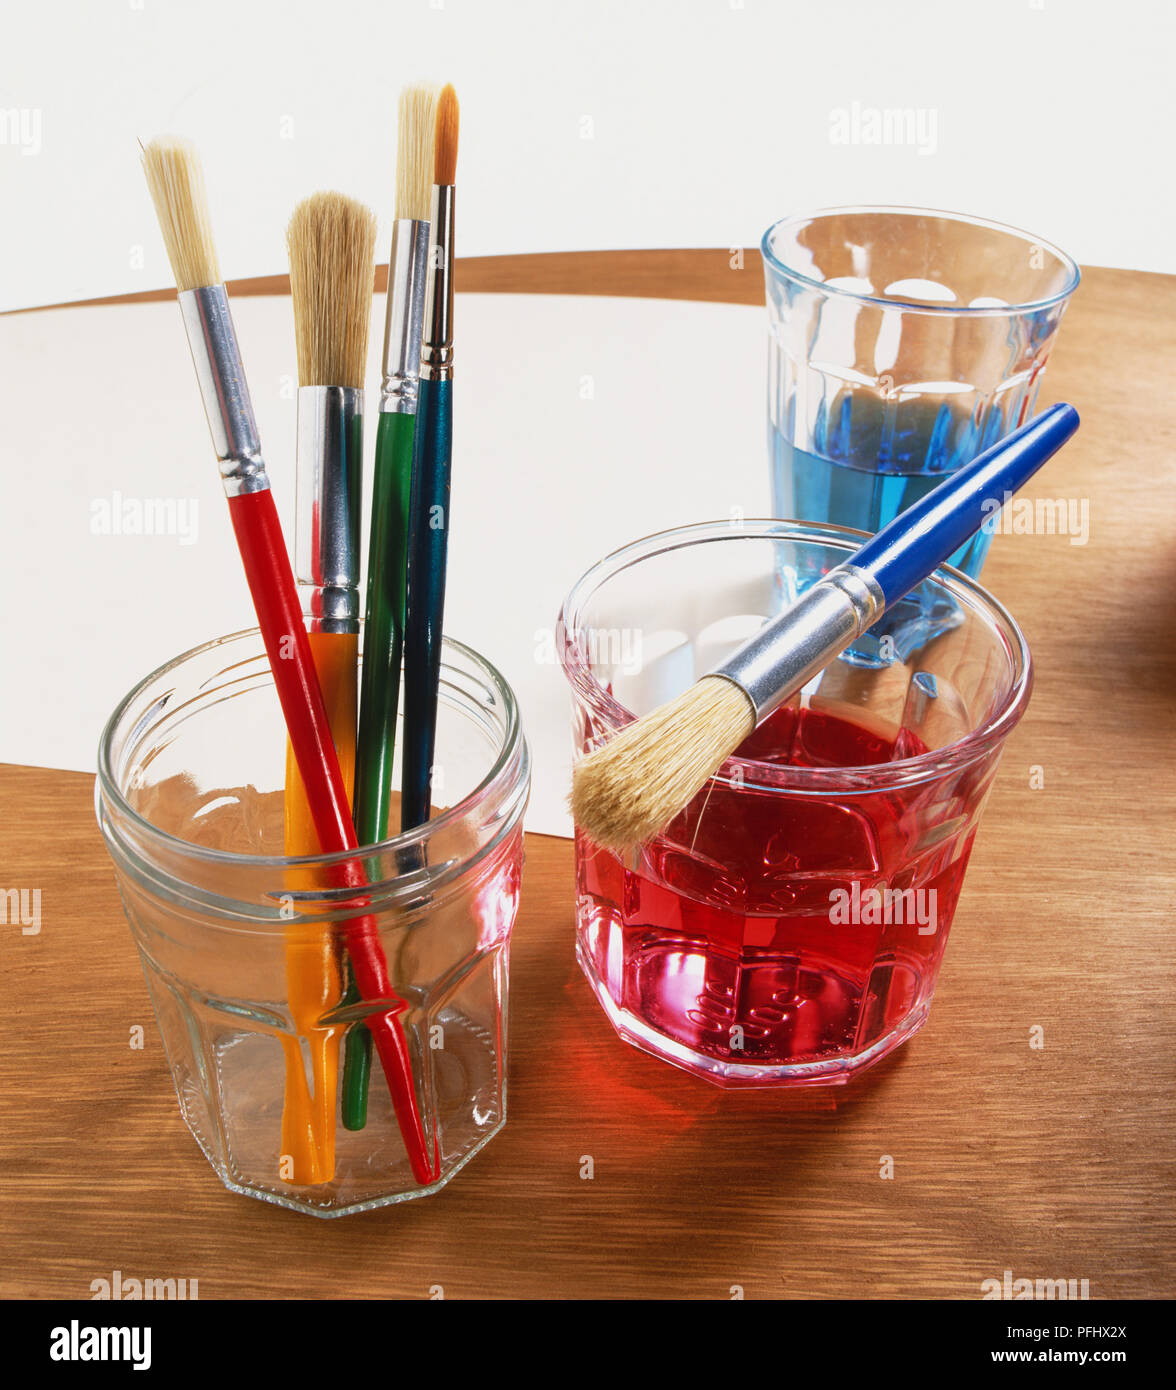 Glass tumbler with red coloured water and paint brush resting on rim, tumbler with blue water, assorted paint brushes in a jar, sheet of paper on table, front view. Stock Photo